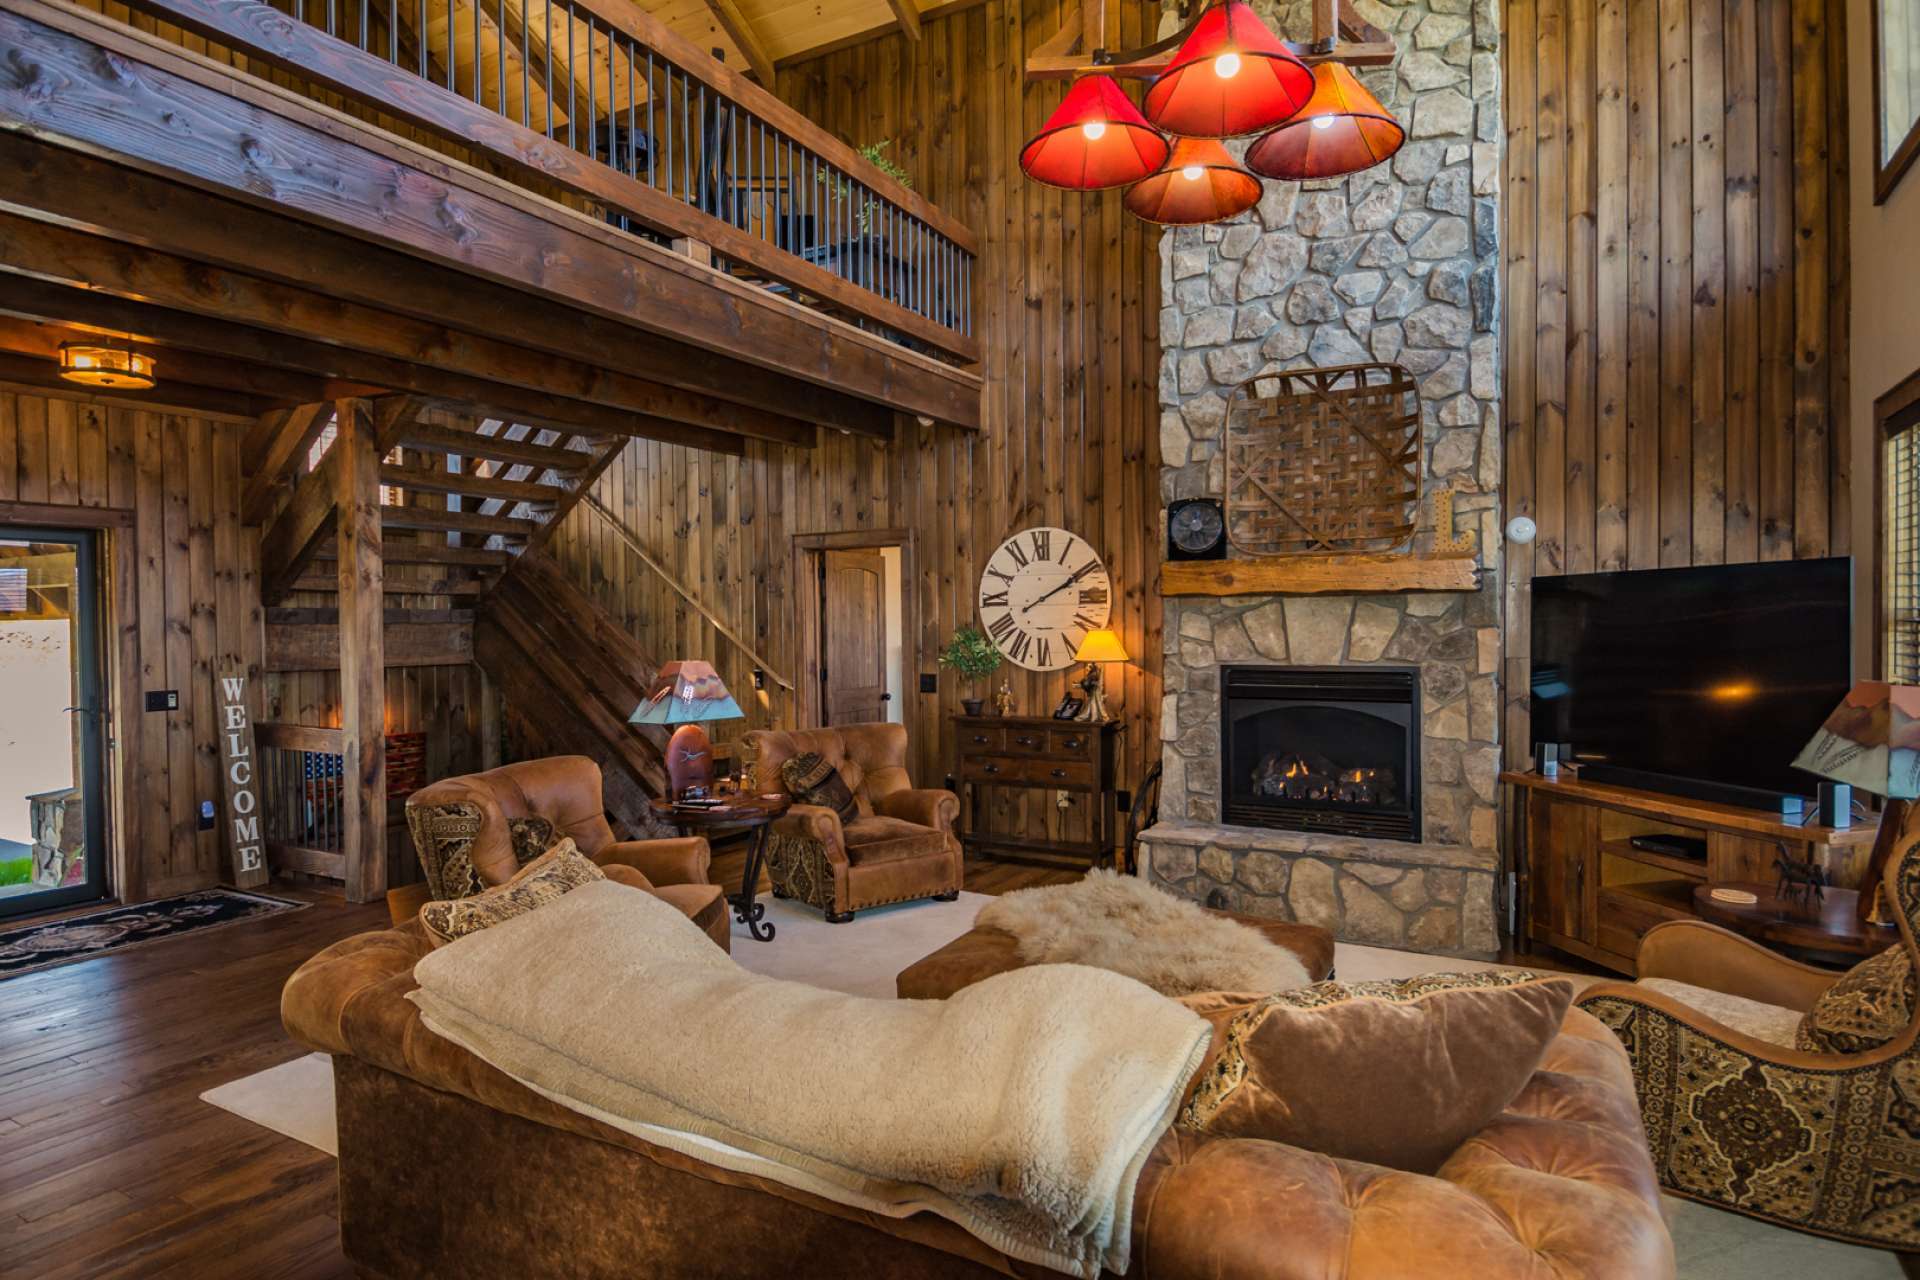 High quality appointments reign in this Adirondack style home with thoughtful details throughout the home.  The main level features a spacious great room boasting wood flooring, exposed beams, and unique stone fireplace with gas logs.